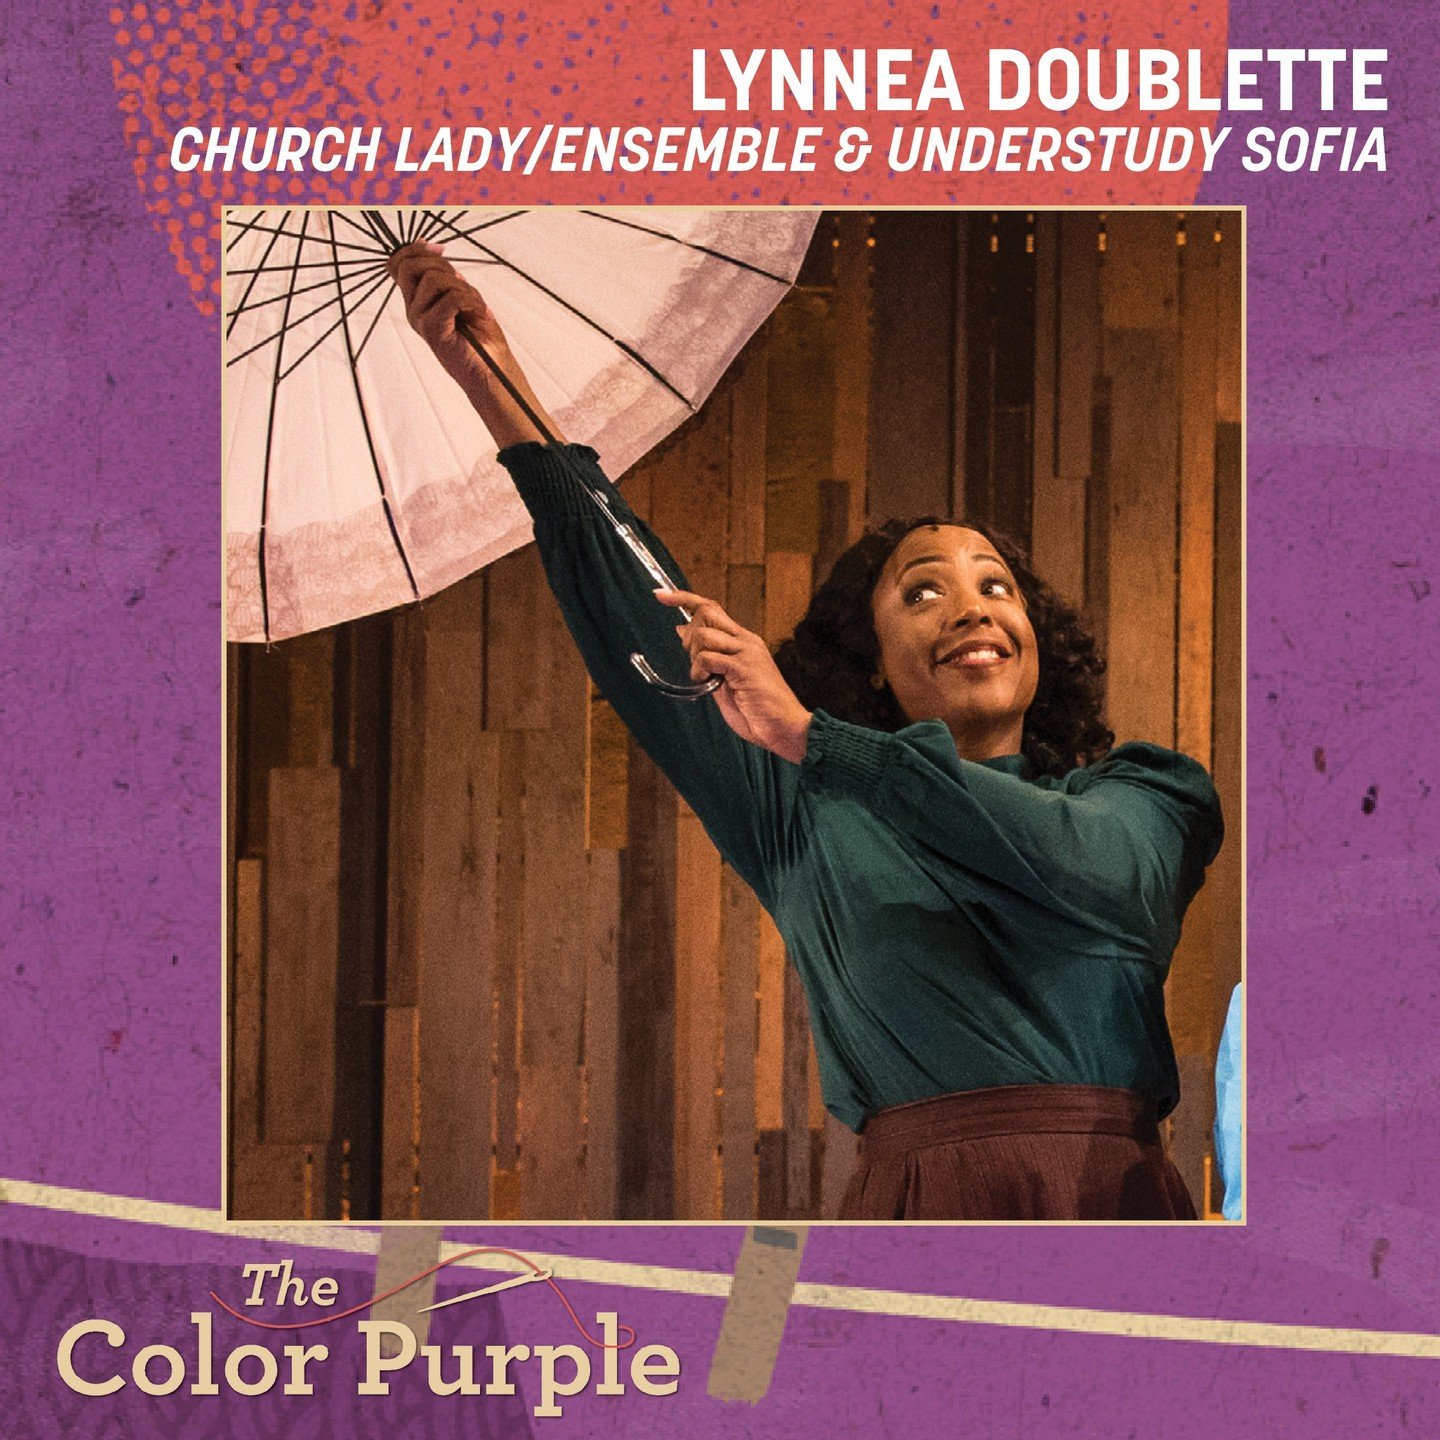 Learn more about the Church Ladies (Lynnea Doublette, Angela Stewart and Heather McElrath) of THE COLOR PURPLE at Latt&eacute; Da! 

Several remaining performances are SOLD OUT so be sure to get your tickets today through the link in bio for this &qu